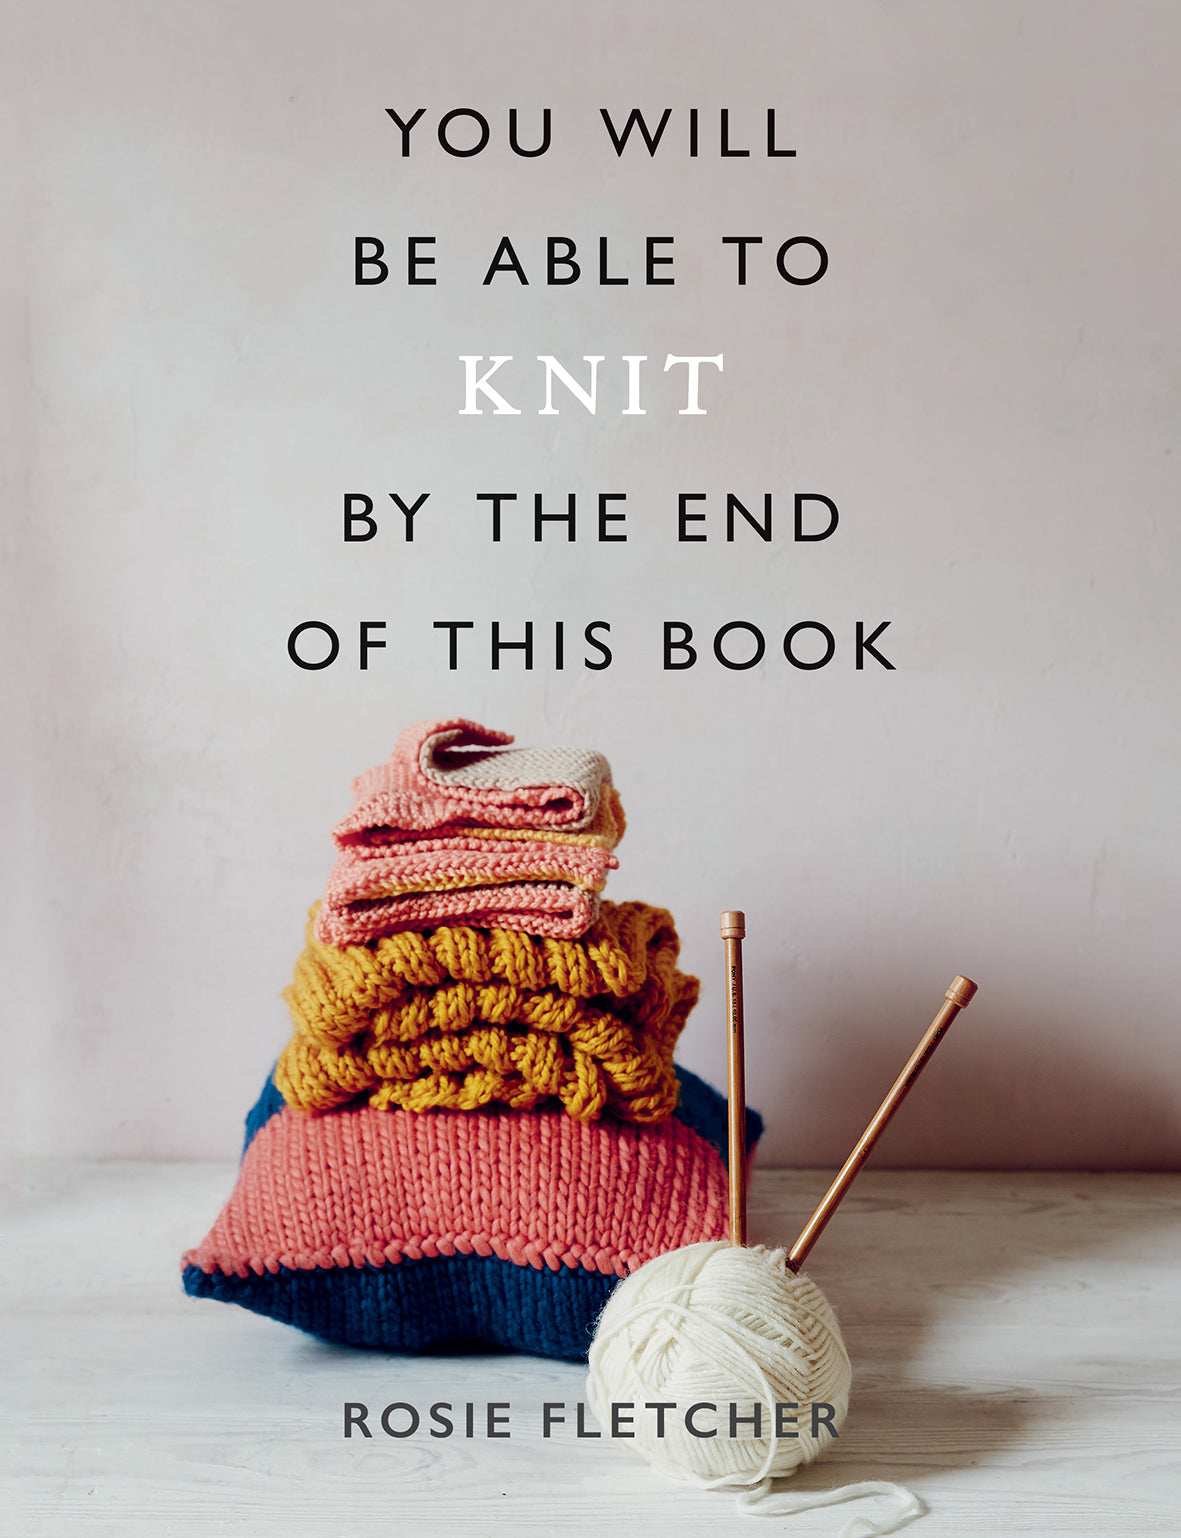 You Will Be Able to Knit by the End of This Book by Rosie Fletcher